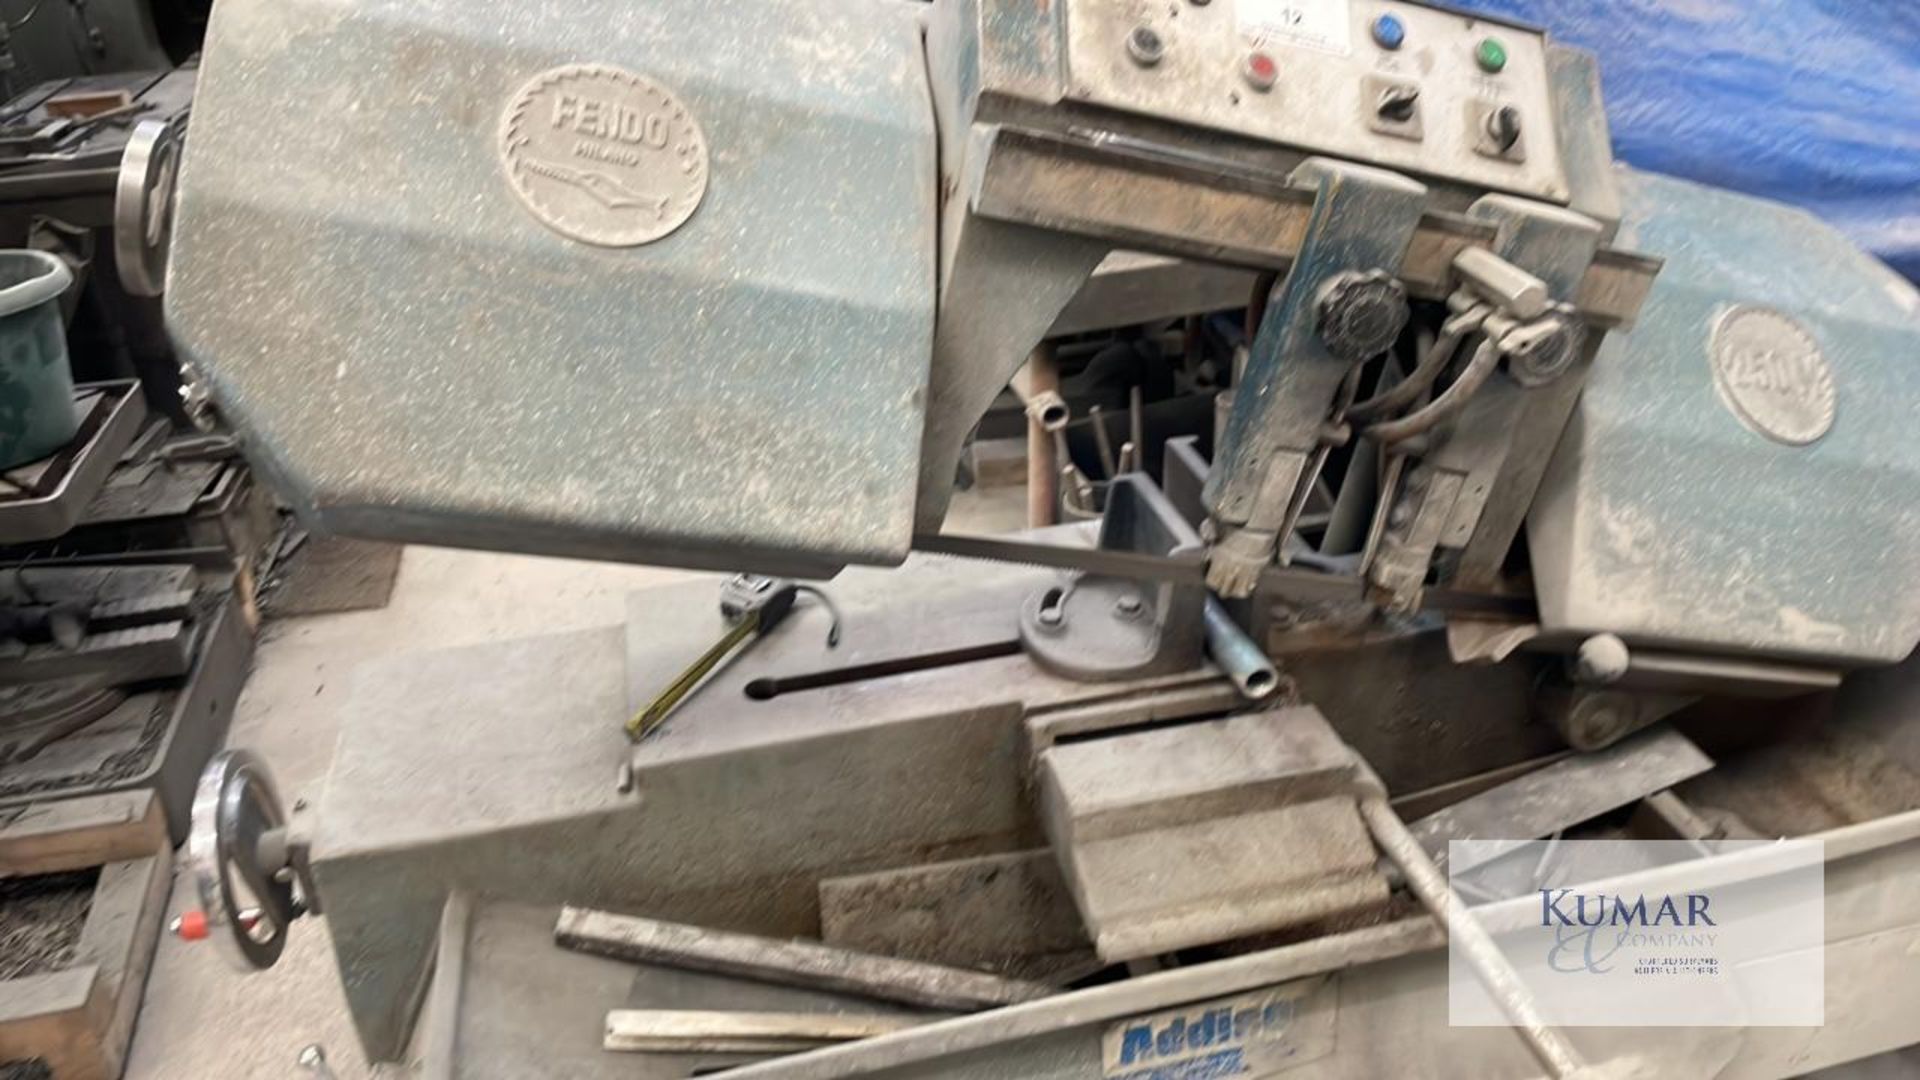 Fendo Milano 250M Inclinable Band Saw - Image 3 of 4